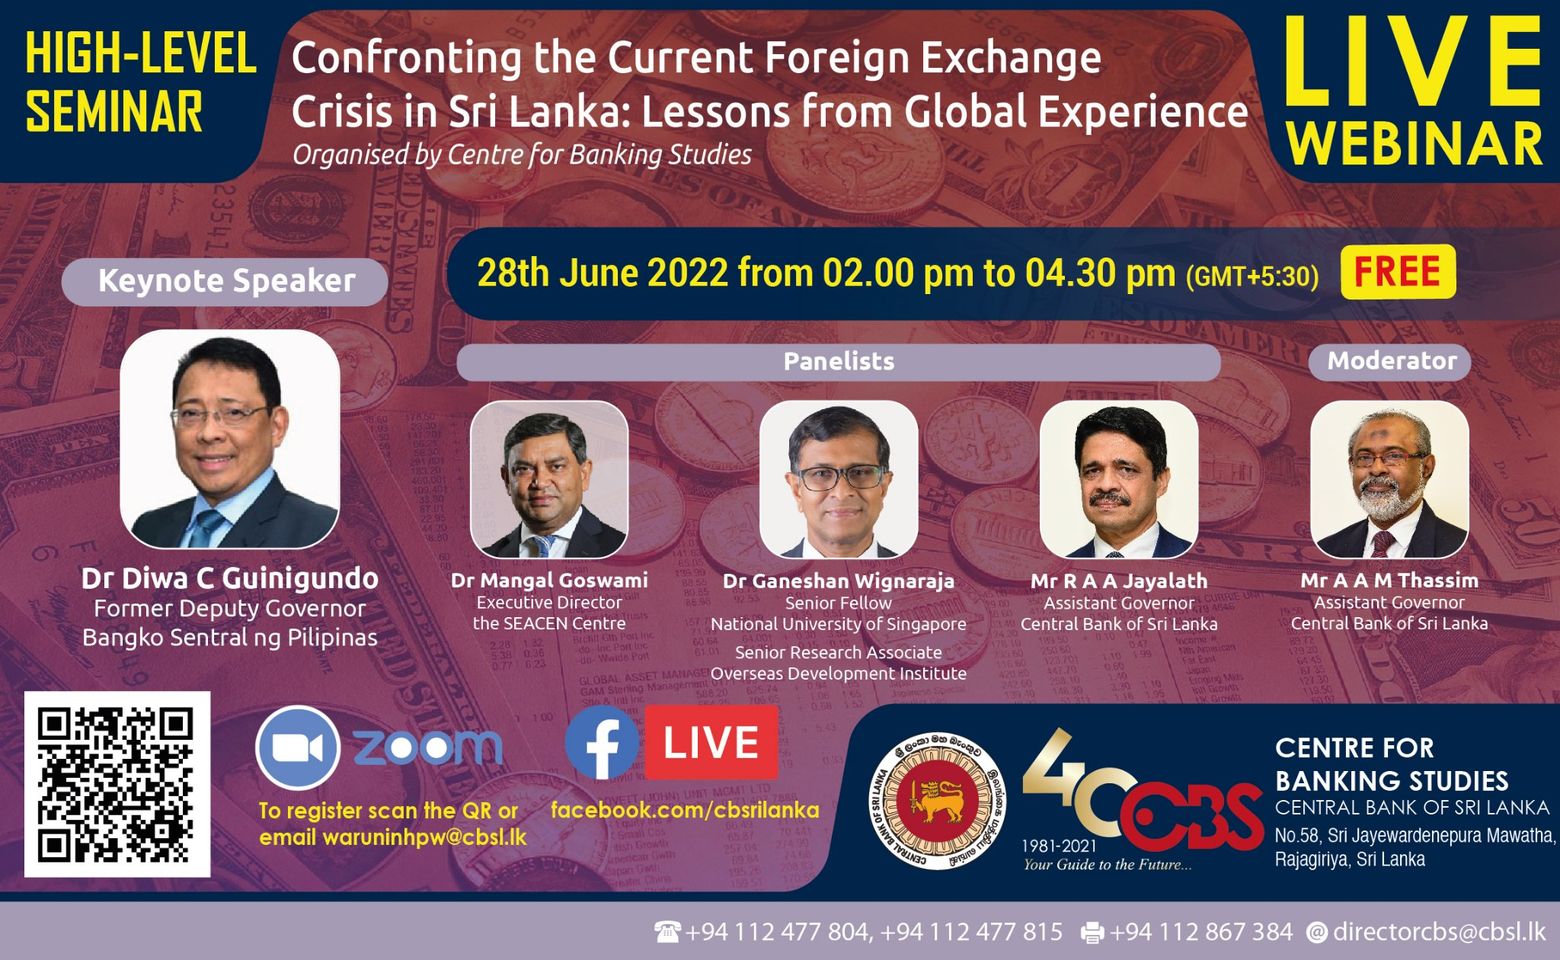 High Level Seminar on “Confronting the Current Foreign Exchange Crisis in Sri Lanka: Lessons from Global Experience”